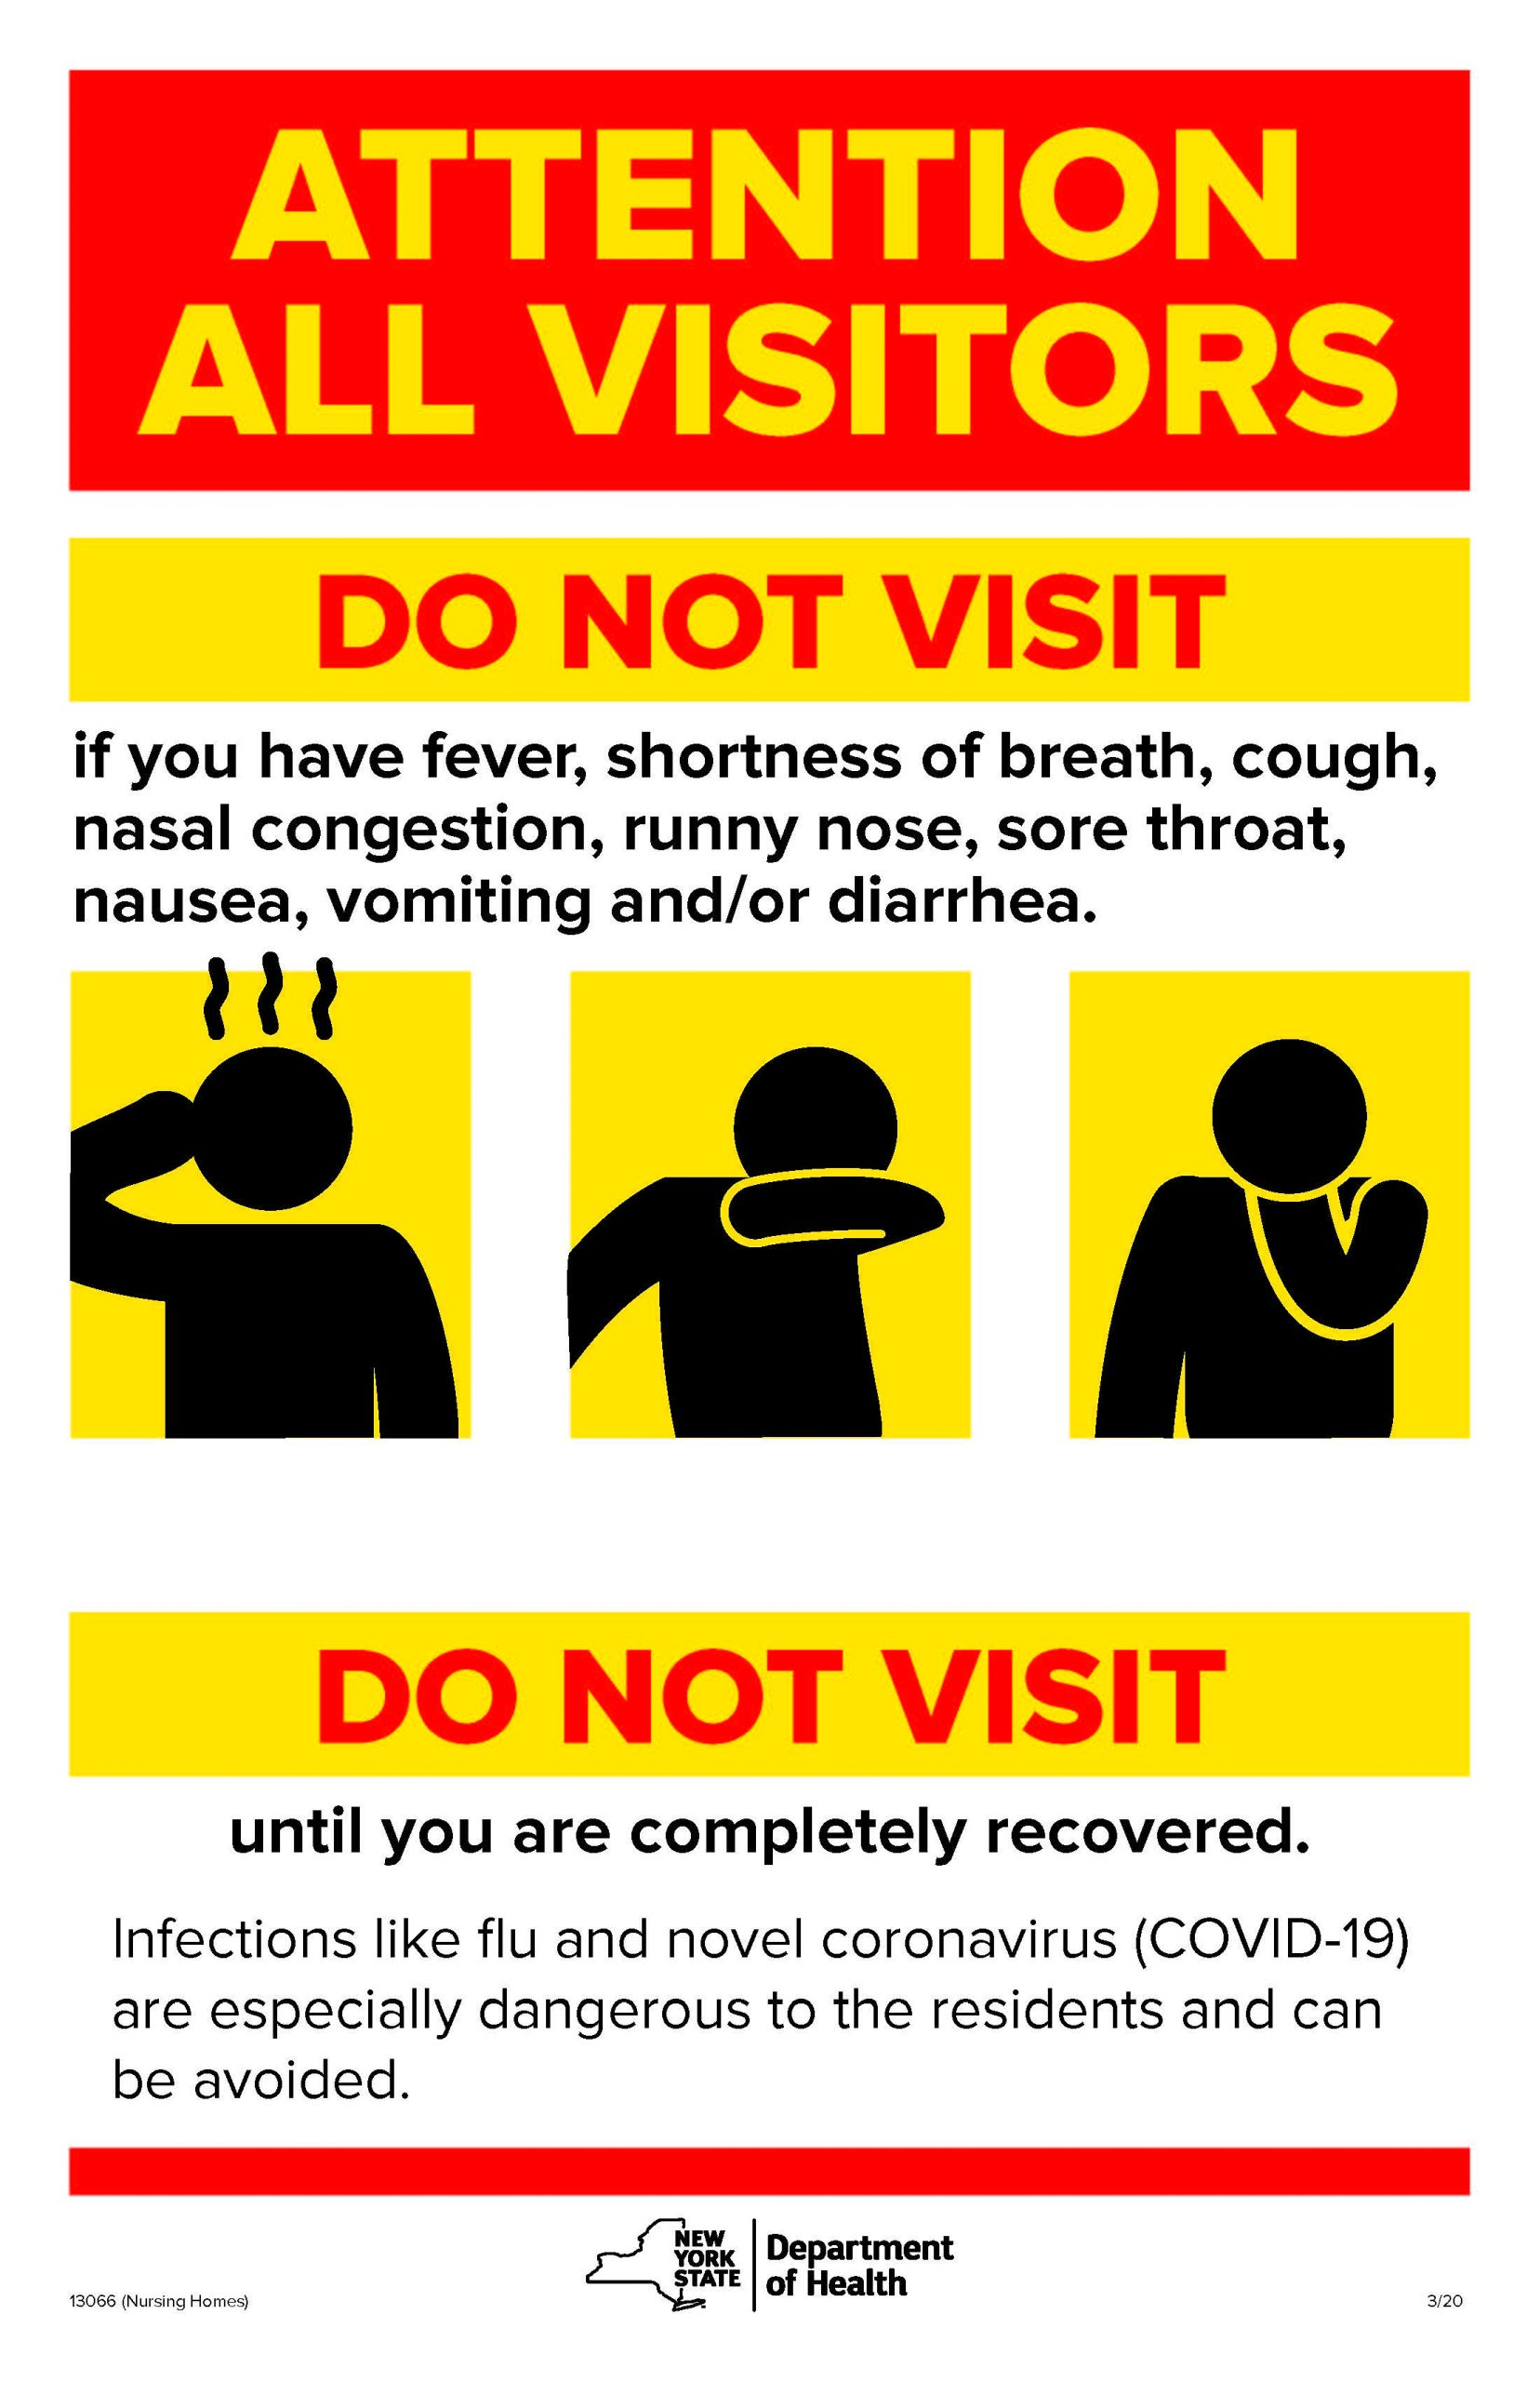 COVID-19 visitor guidelines: DO NOT VISIT until you are completely recovered if you have fever, shortness of breath, cough, nasal congestion, runny nose, sore throat, nausea, vomiting, and/or diarrhea.